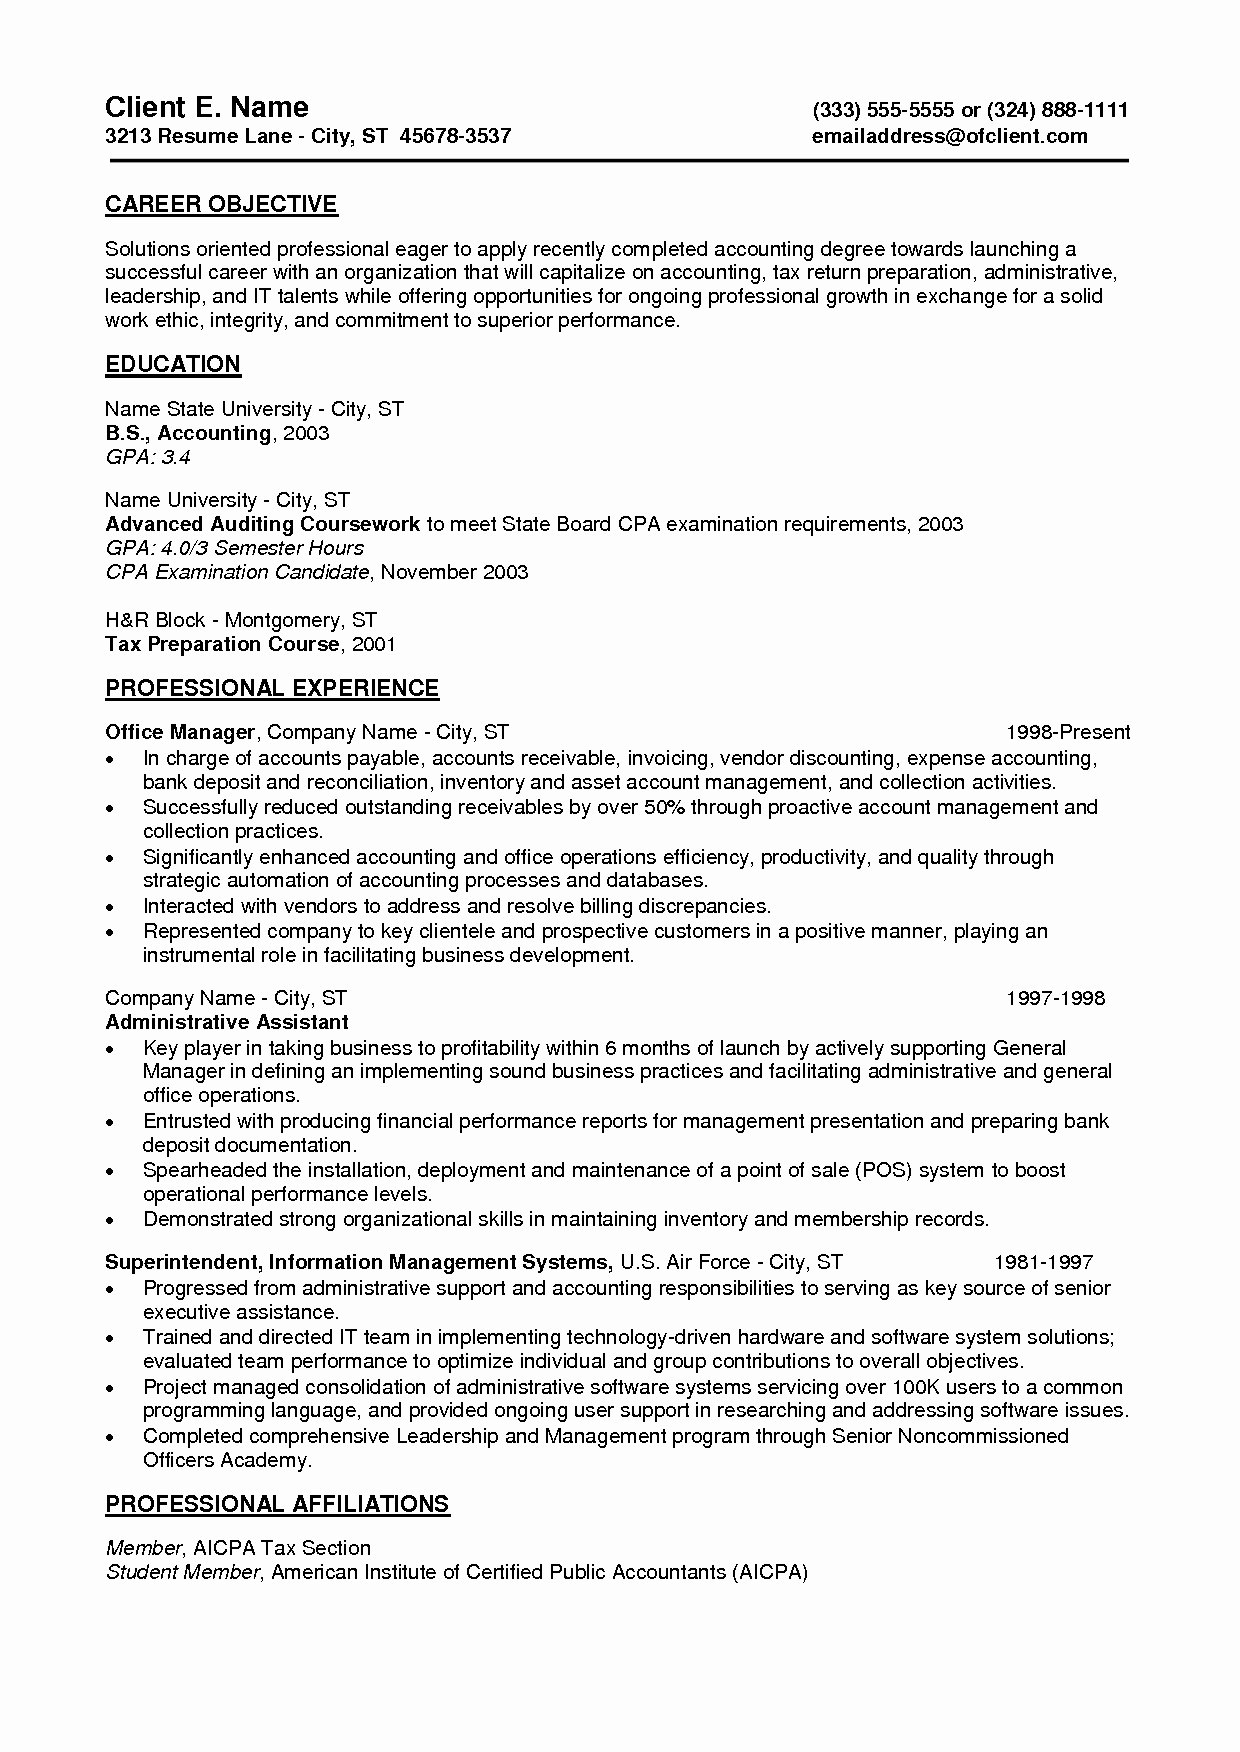 Resume Templates Objective Samples for Entry Level